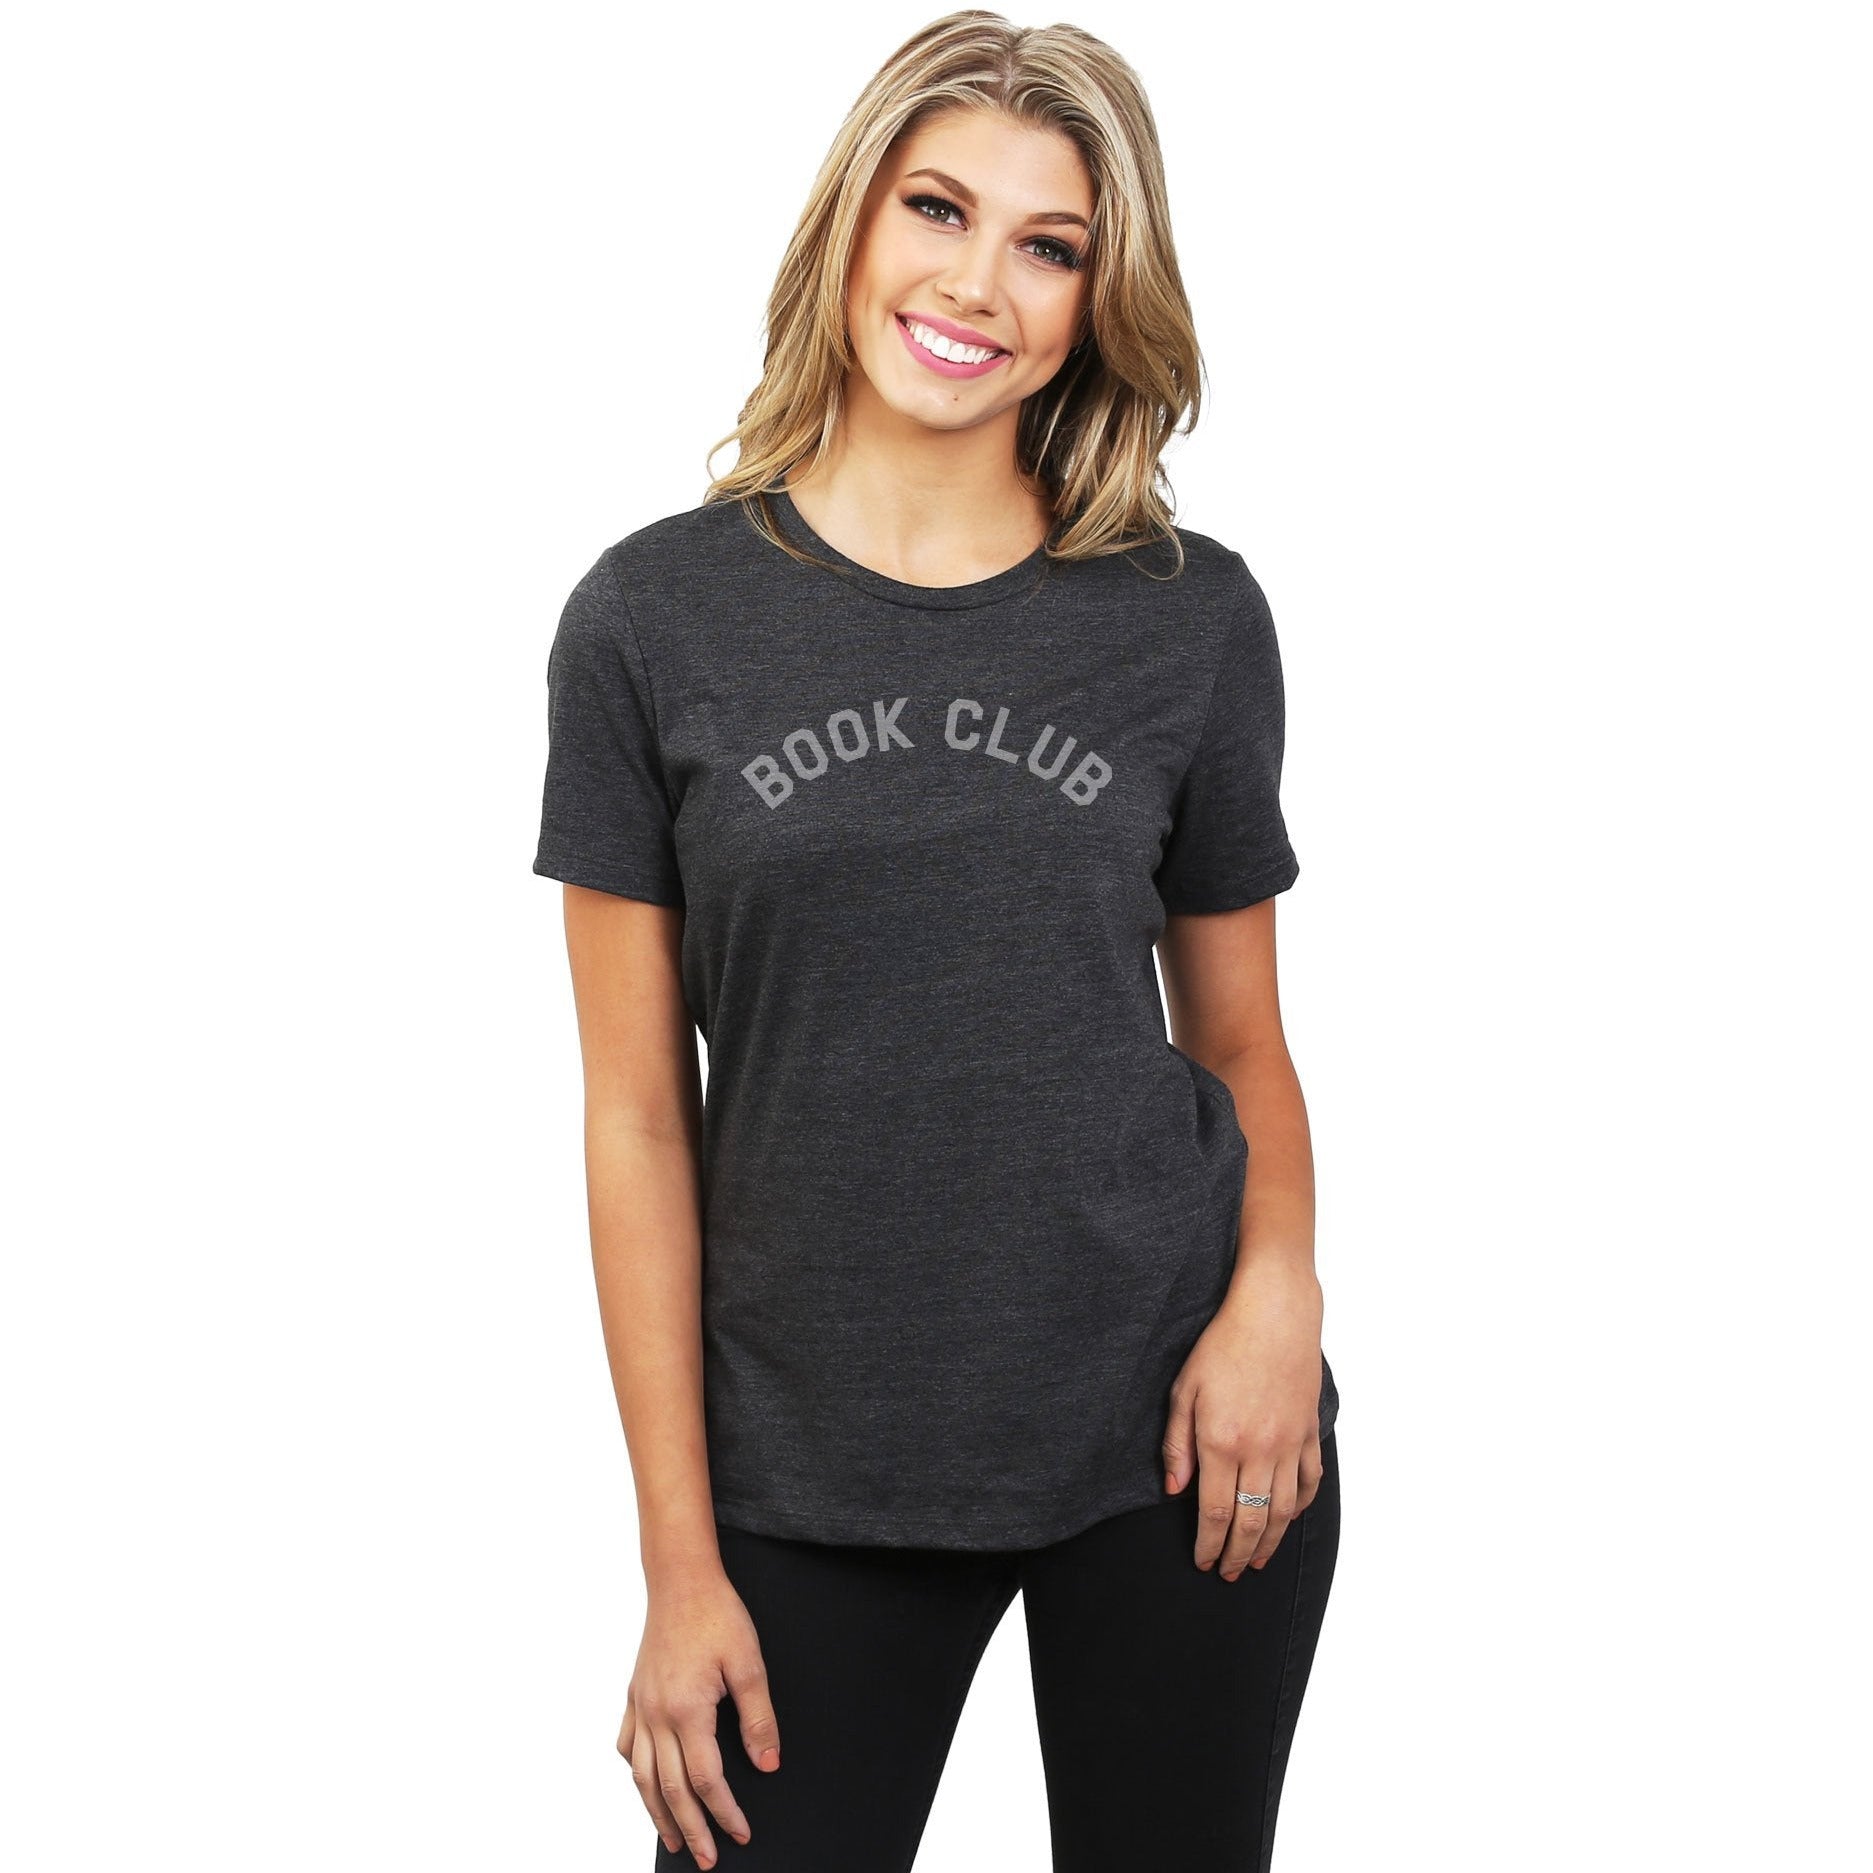 Book Club Women's Relaxed Crewneck T-Shirt Top Tee Charcoal